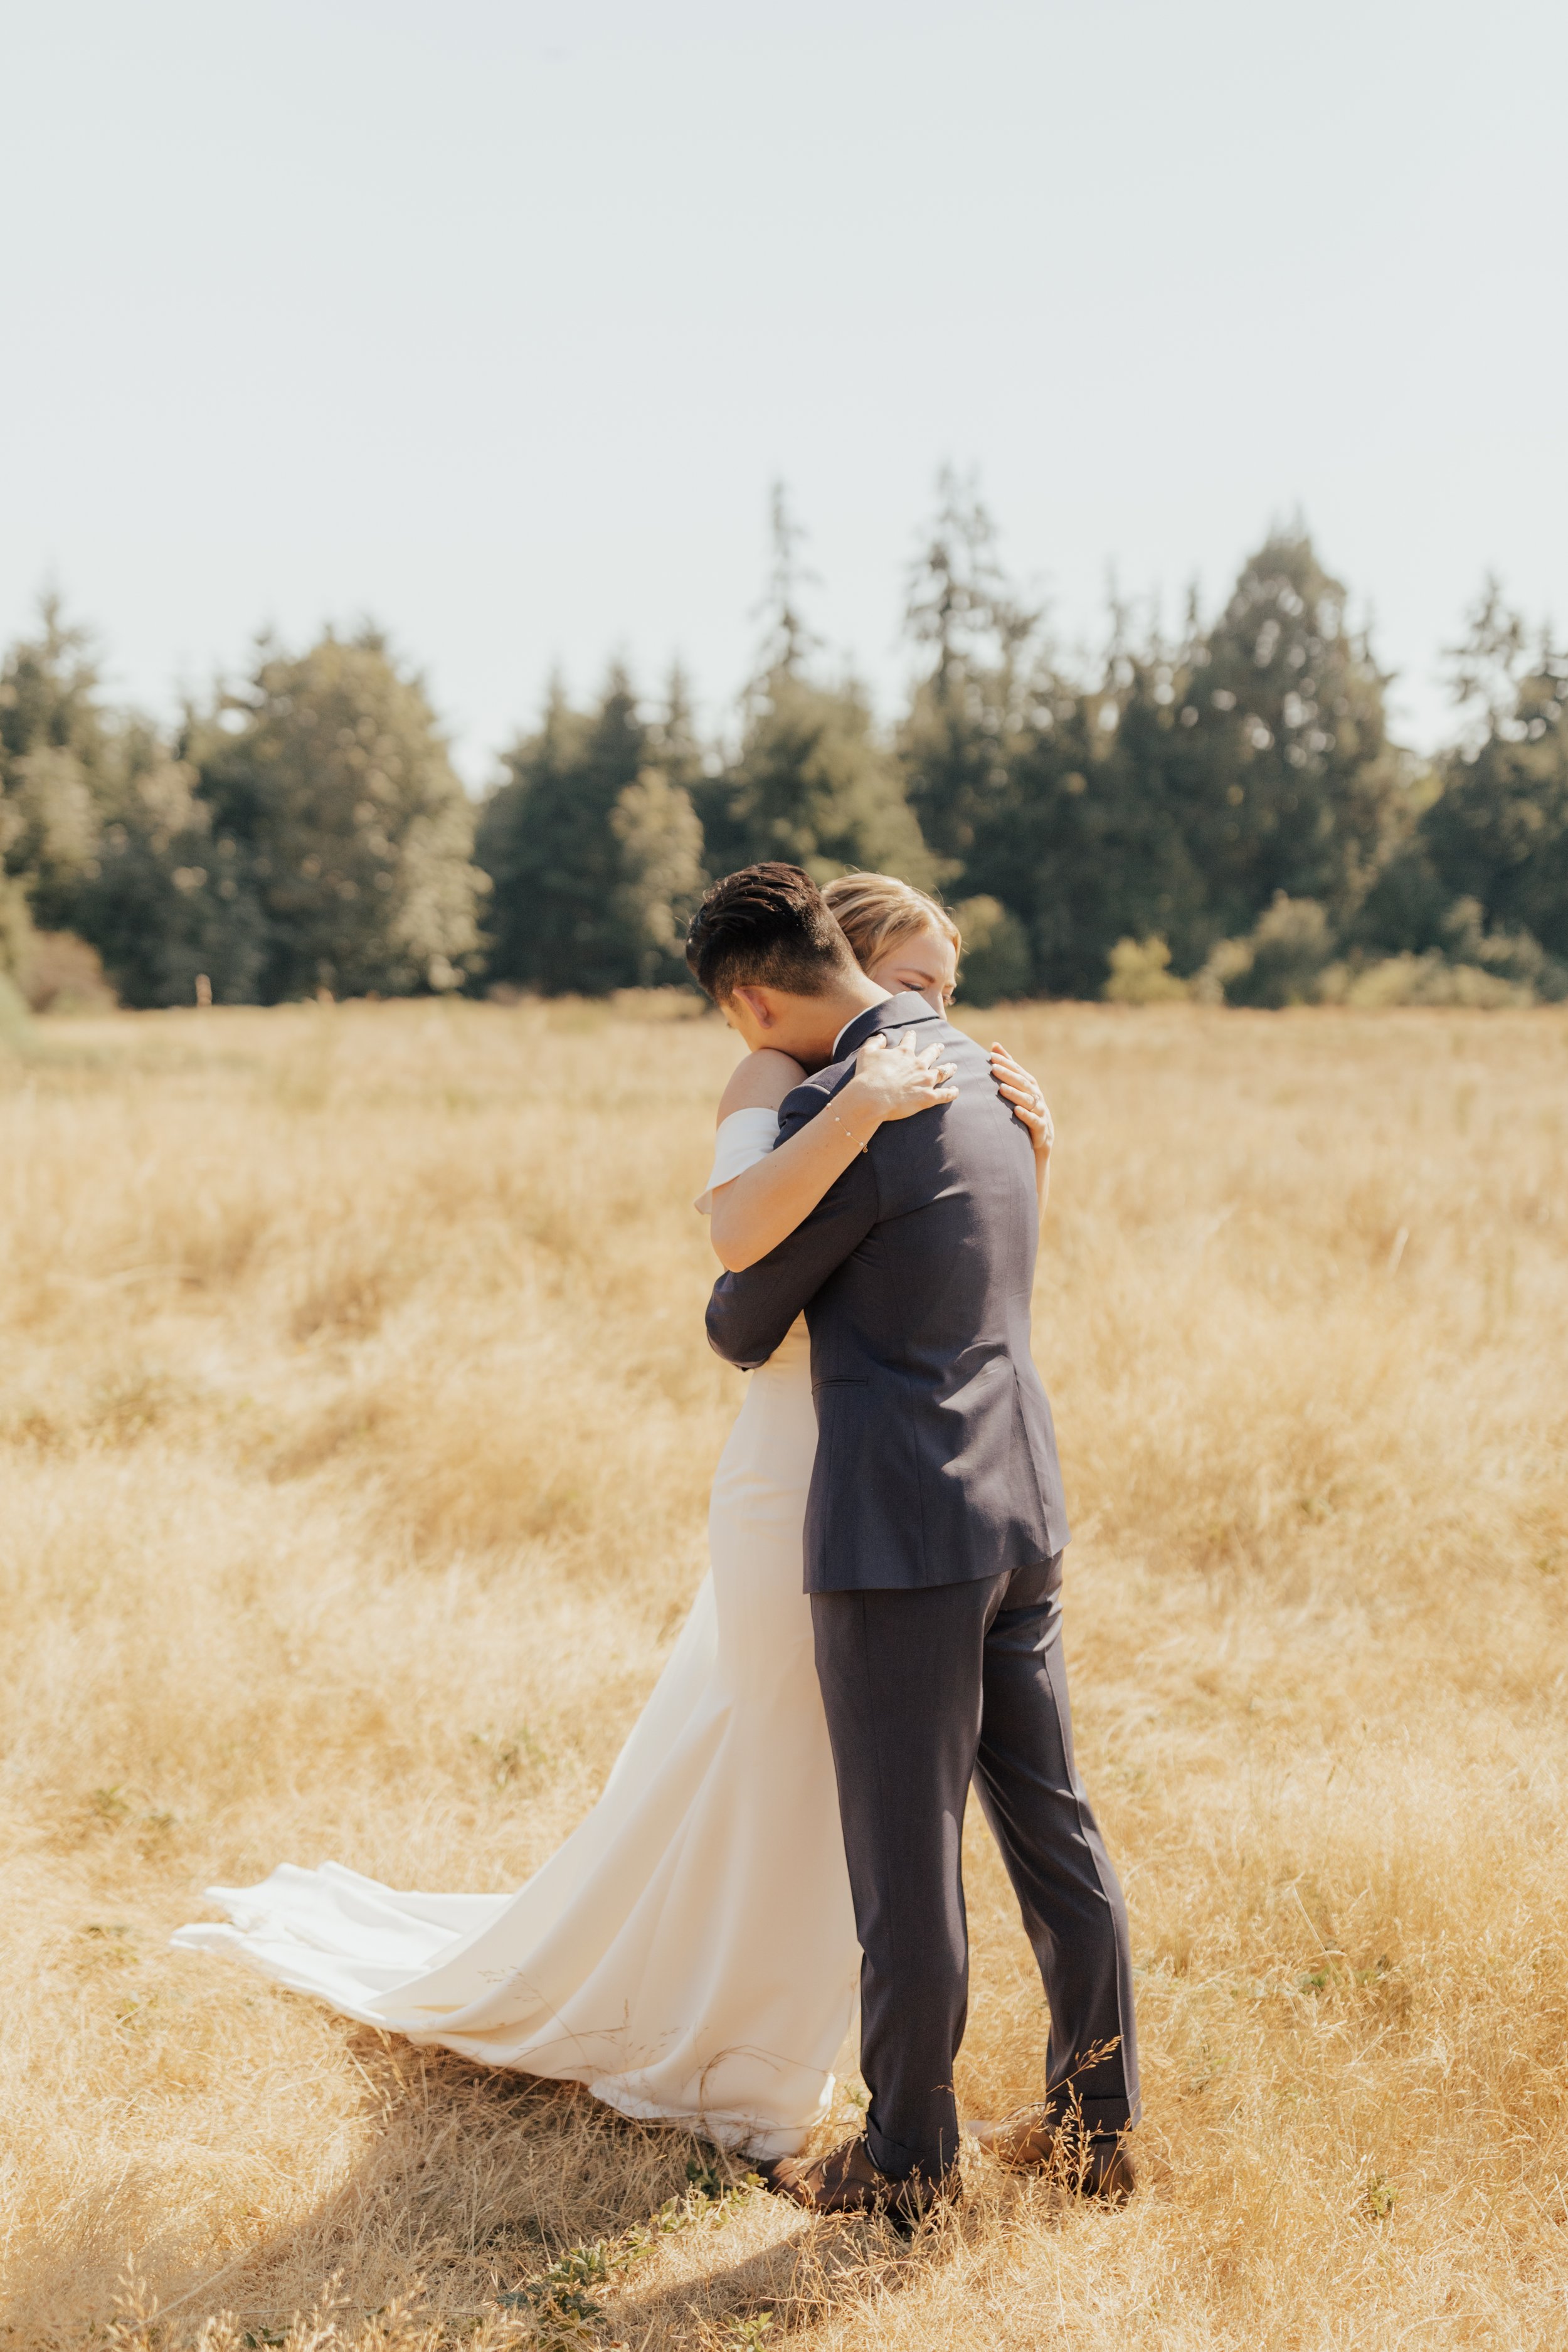 seattle-wedding-planner-pacific-engagements-discovery-park-wedding-portraits-bride-and-groom-rachel-syrisko-photography